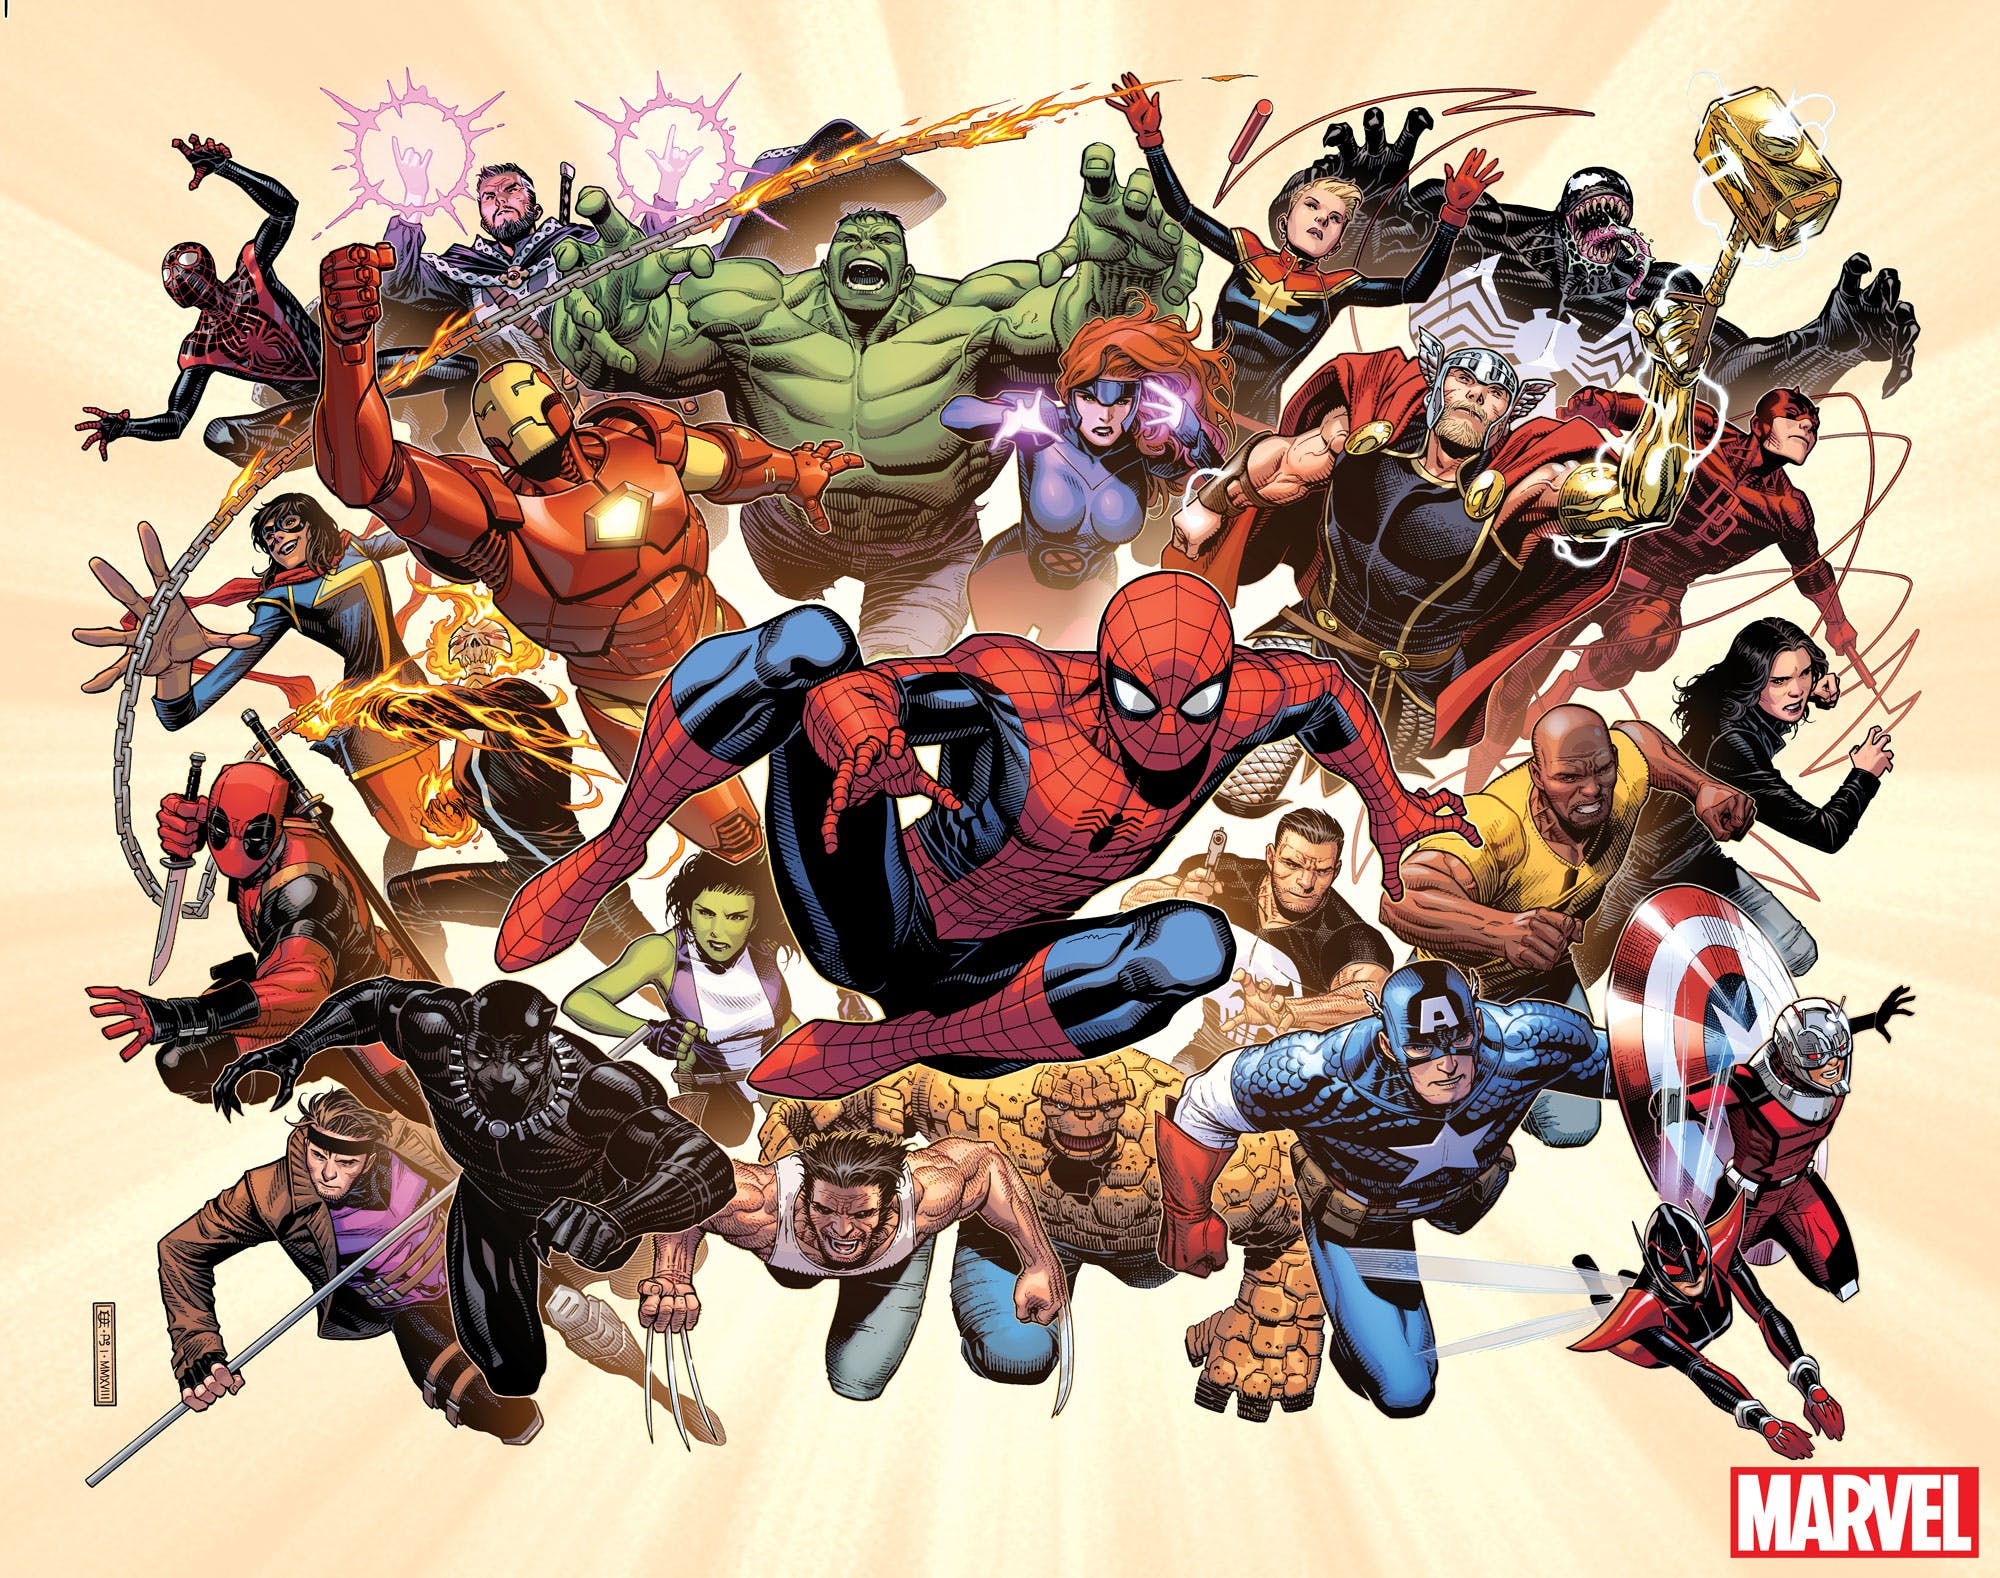 Marvel'S 616 Wallpapers